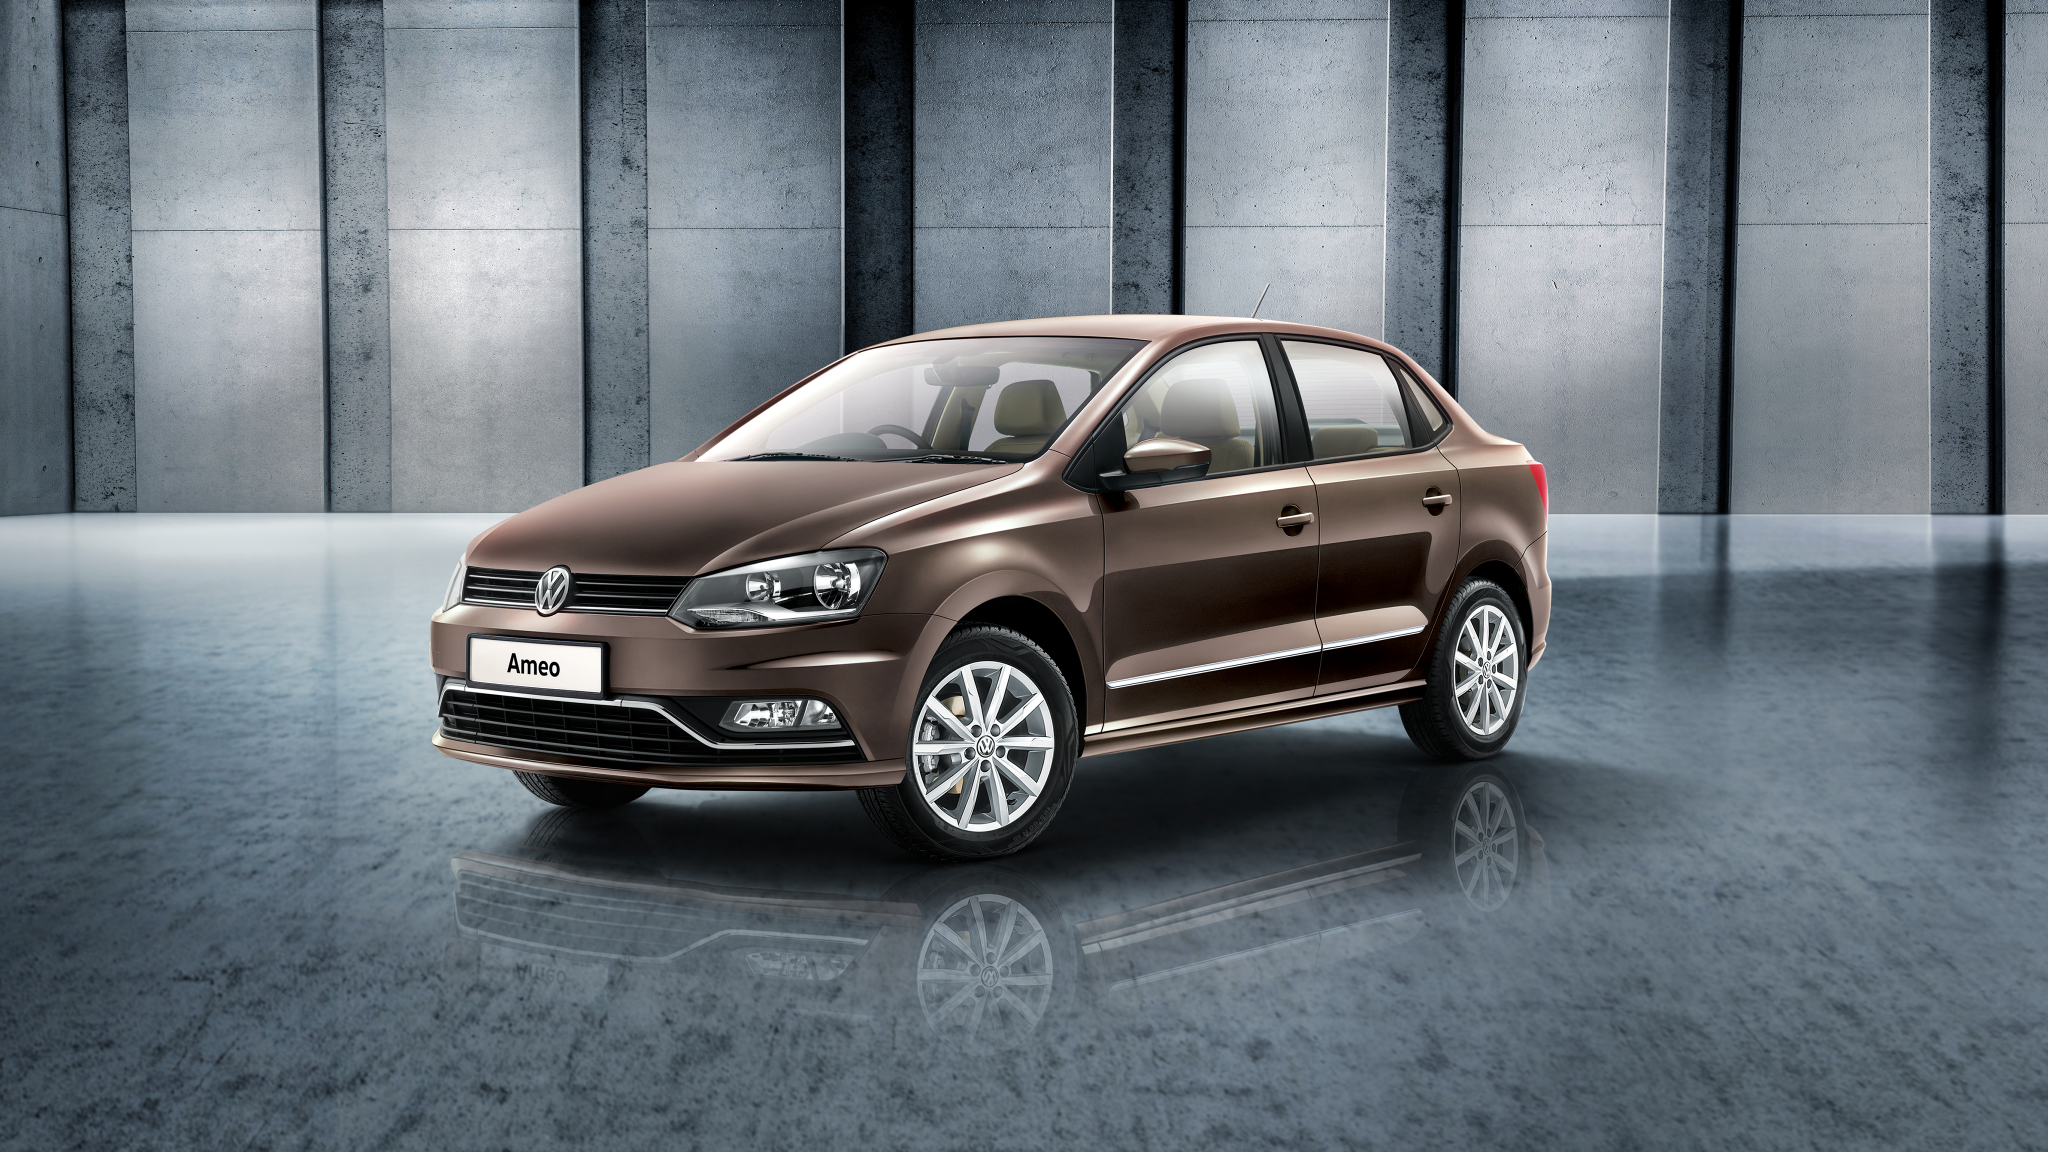 Volkswagen Has Introduced Ameo Corporate Edition With Both Petrol And Diesel Engines - Volkswagen India - Mody Auto Group